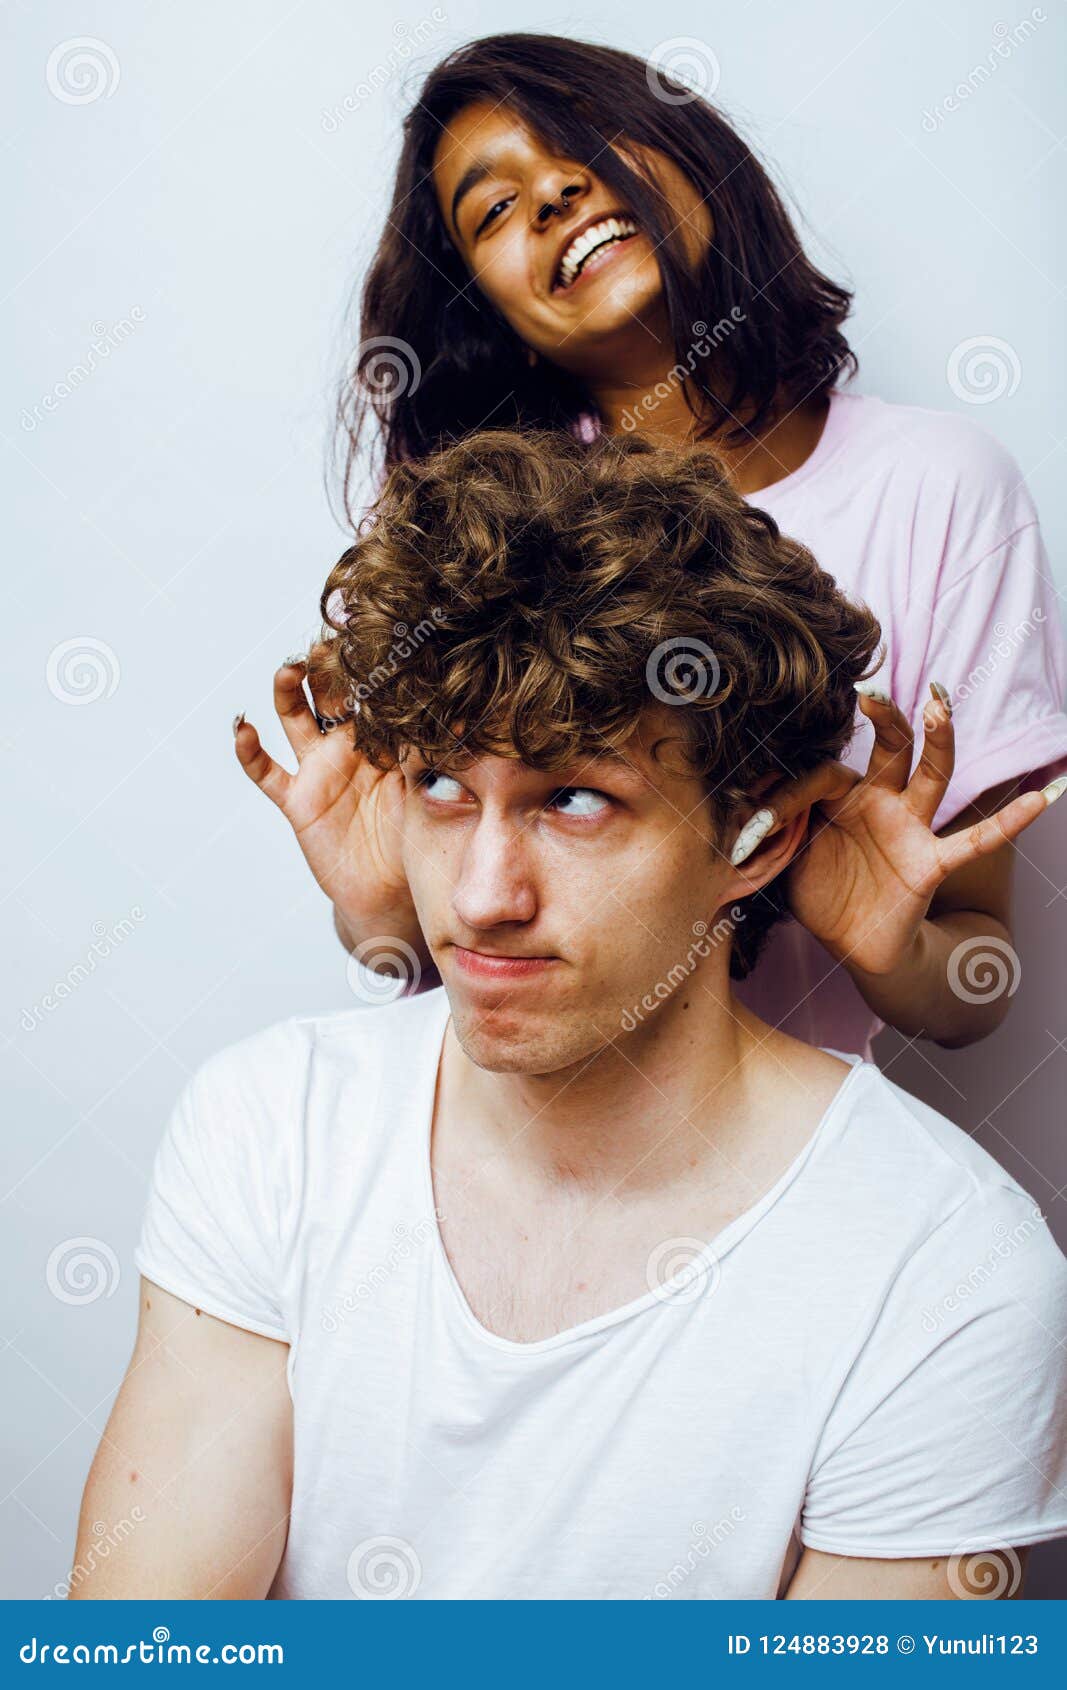 Best Friends Teenage Girl And Boy Together Having Fun Posing Em Stock Photo Image Of Hair Caucasian